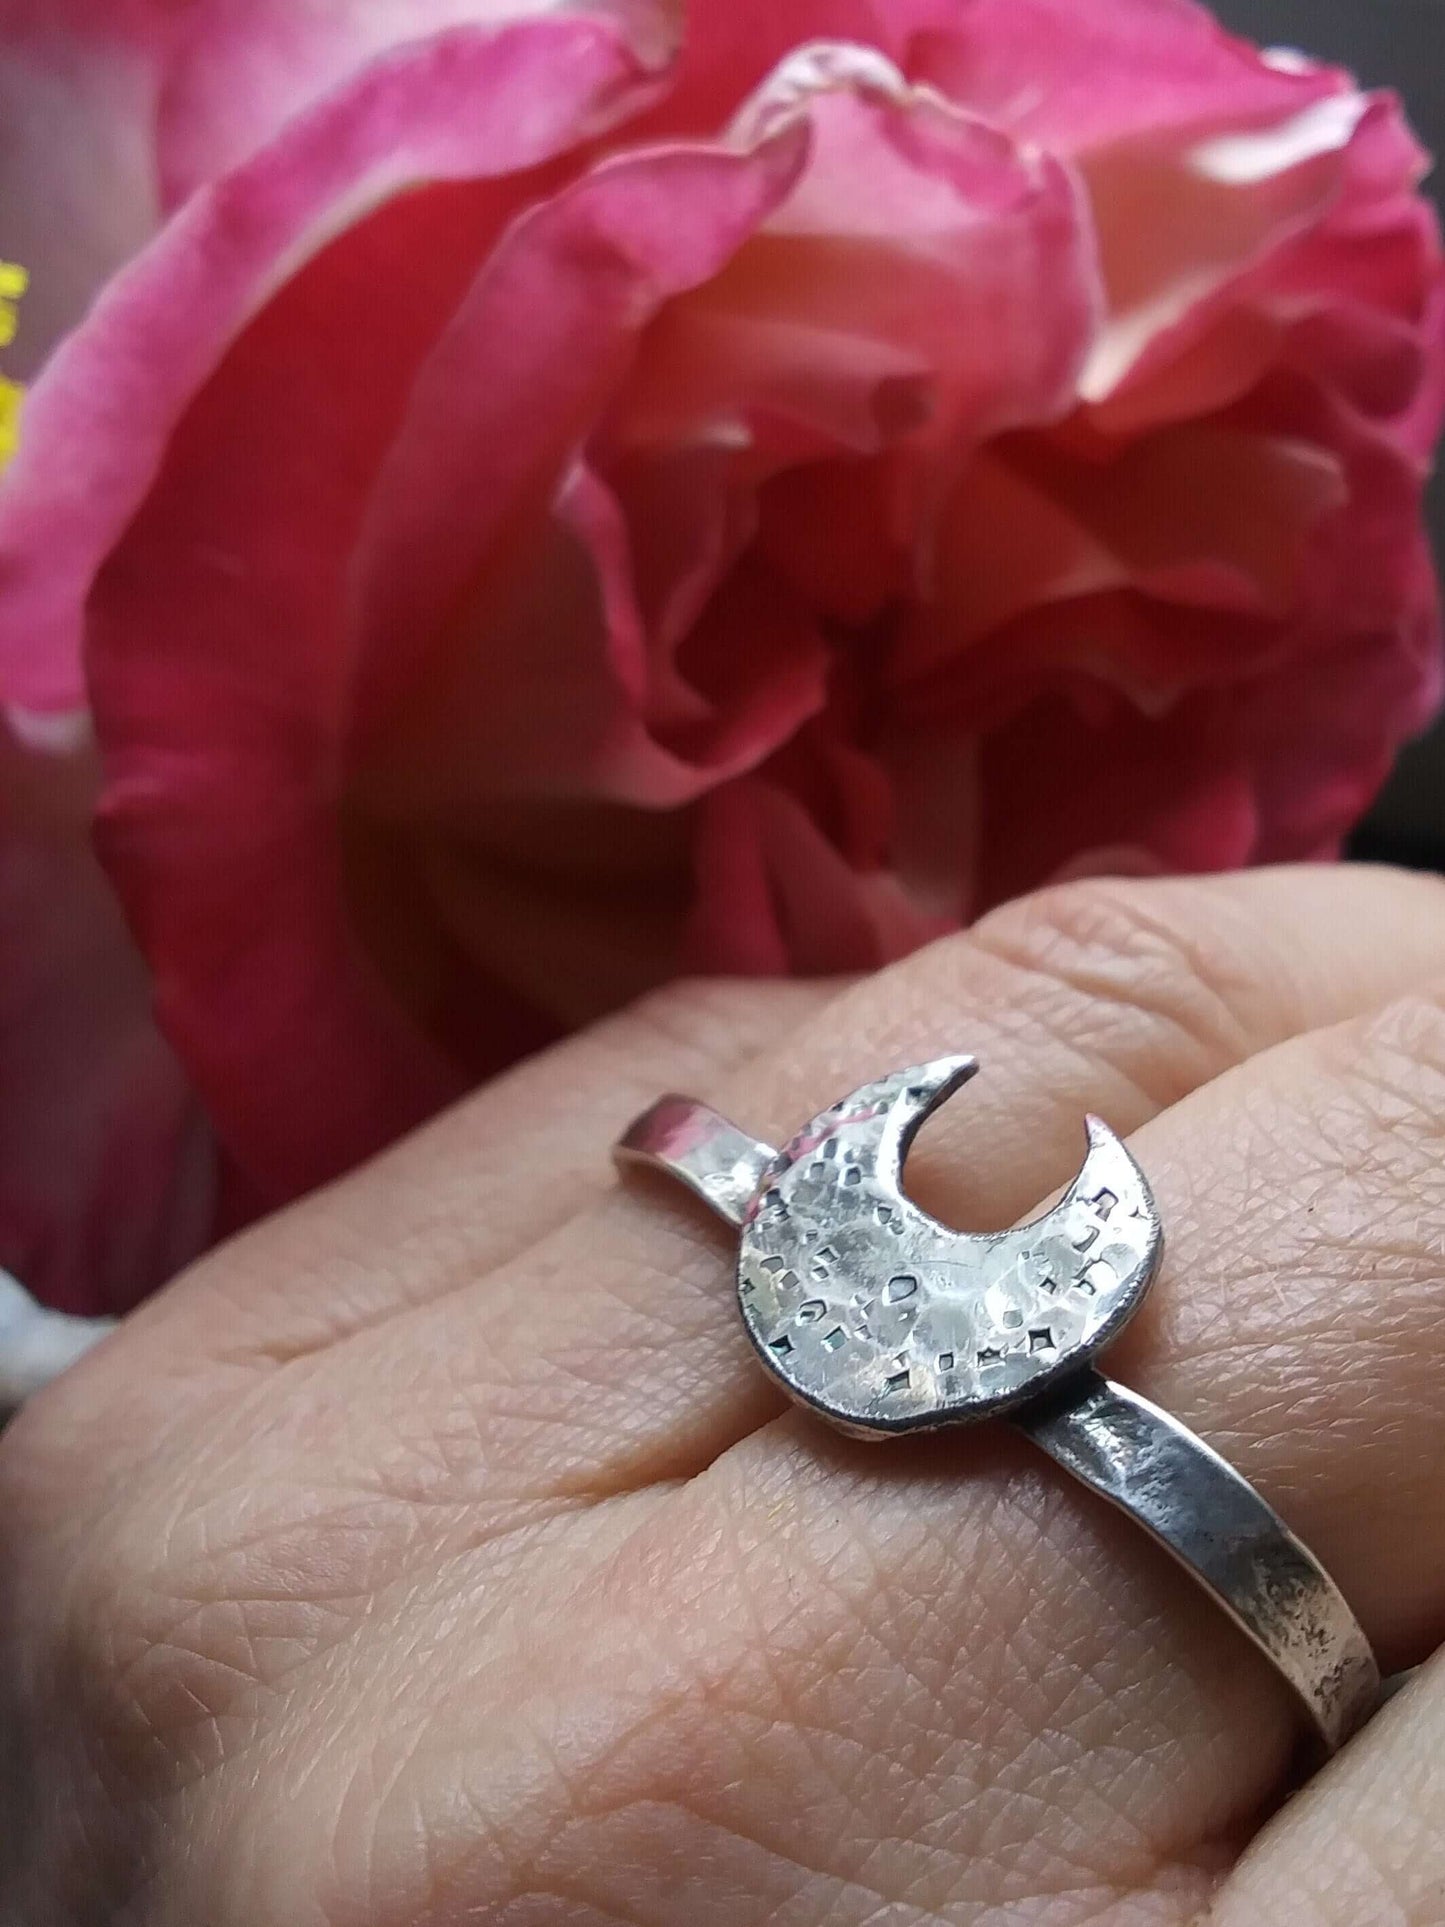 A silver double ring with a crescent moon that has hammered texturing on a hand with folded fingers in front of a large pink rose blossom.